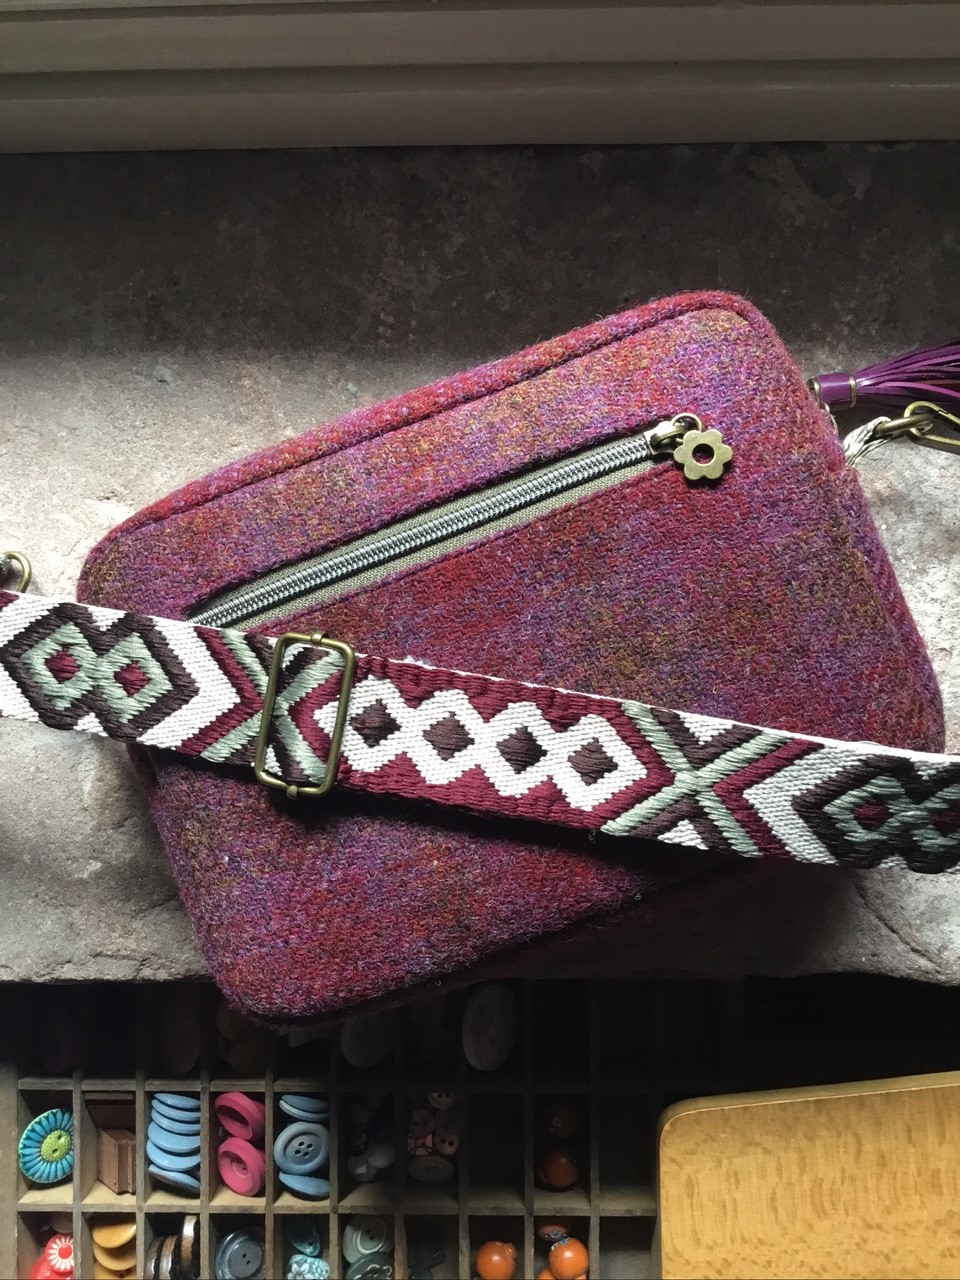 'The Wendy Cross Body Bag' - Two day Bag Making Workshops with Emma of 'Hole House Bags'